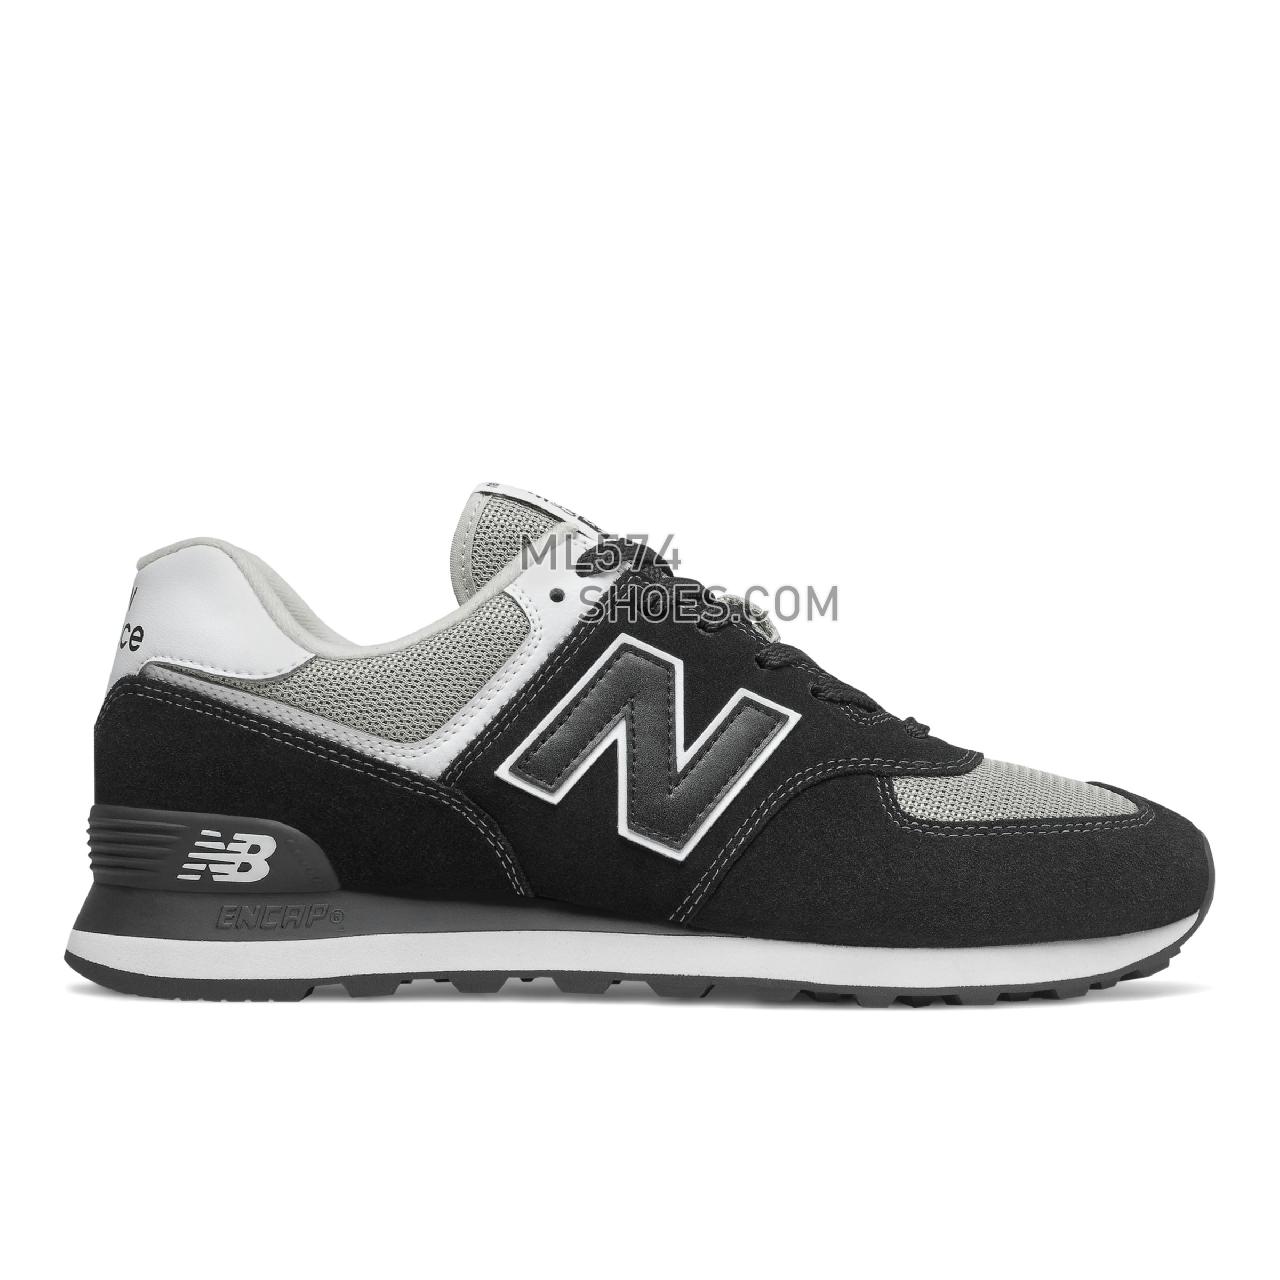 New Balance 574v2 - Men's Classic Sneakers - Black with White - ML574SSN